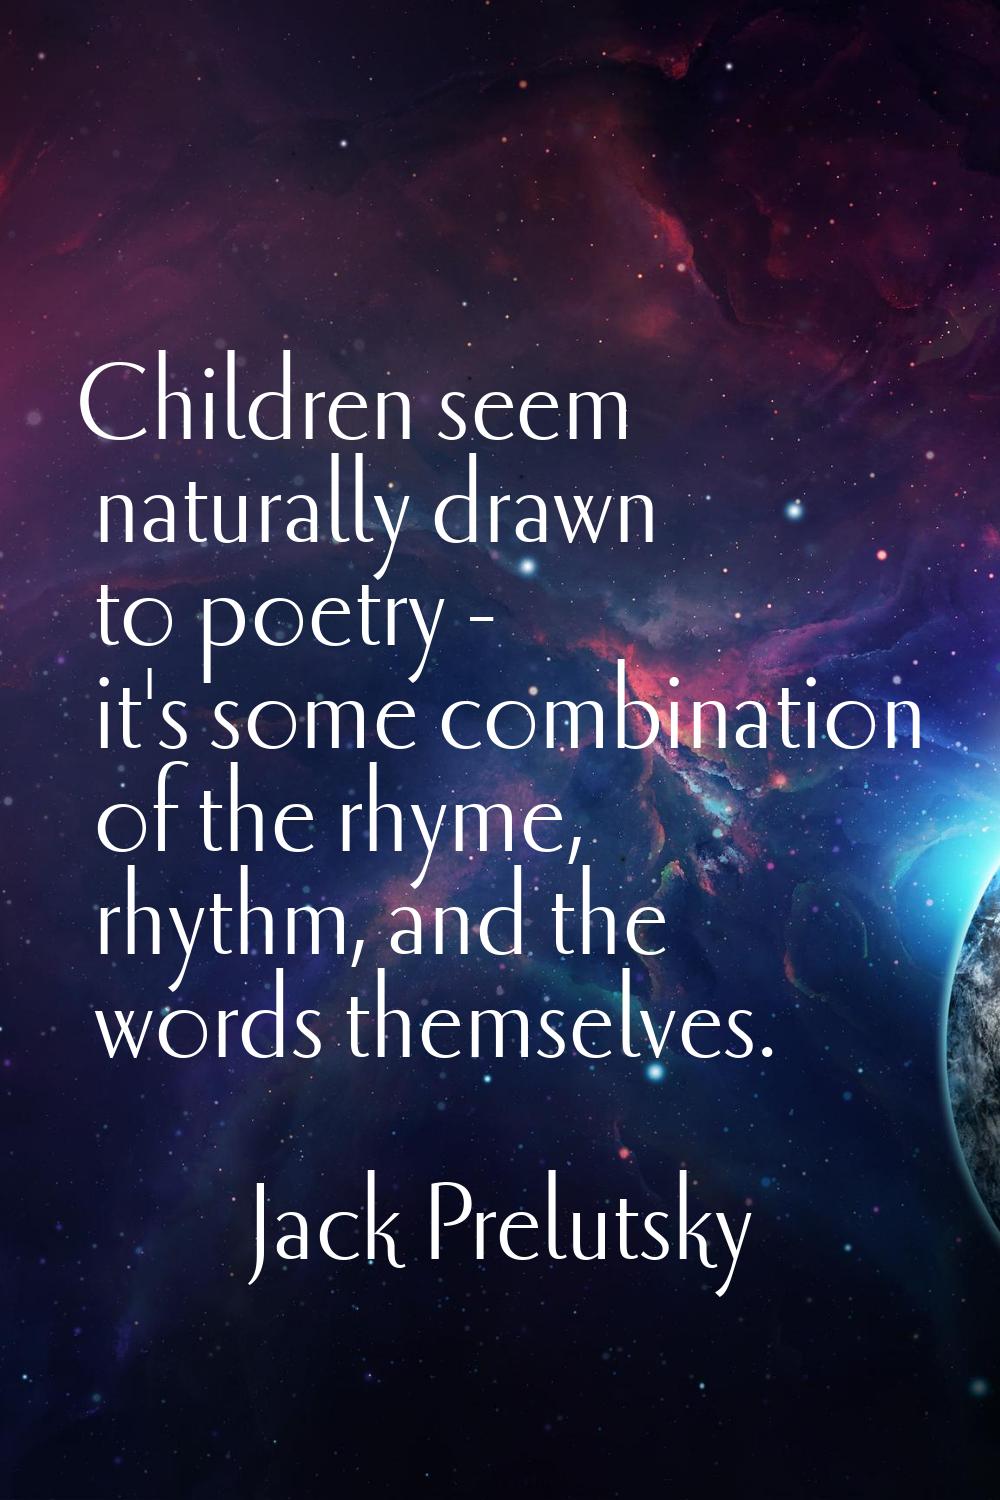 Children seem naturally drawn to poetry - it's some combination of the rhyme, rhythm, and the words